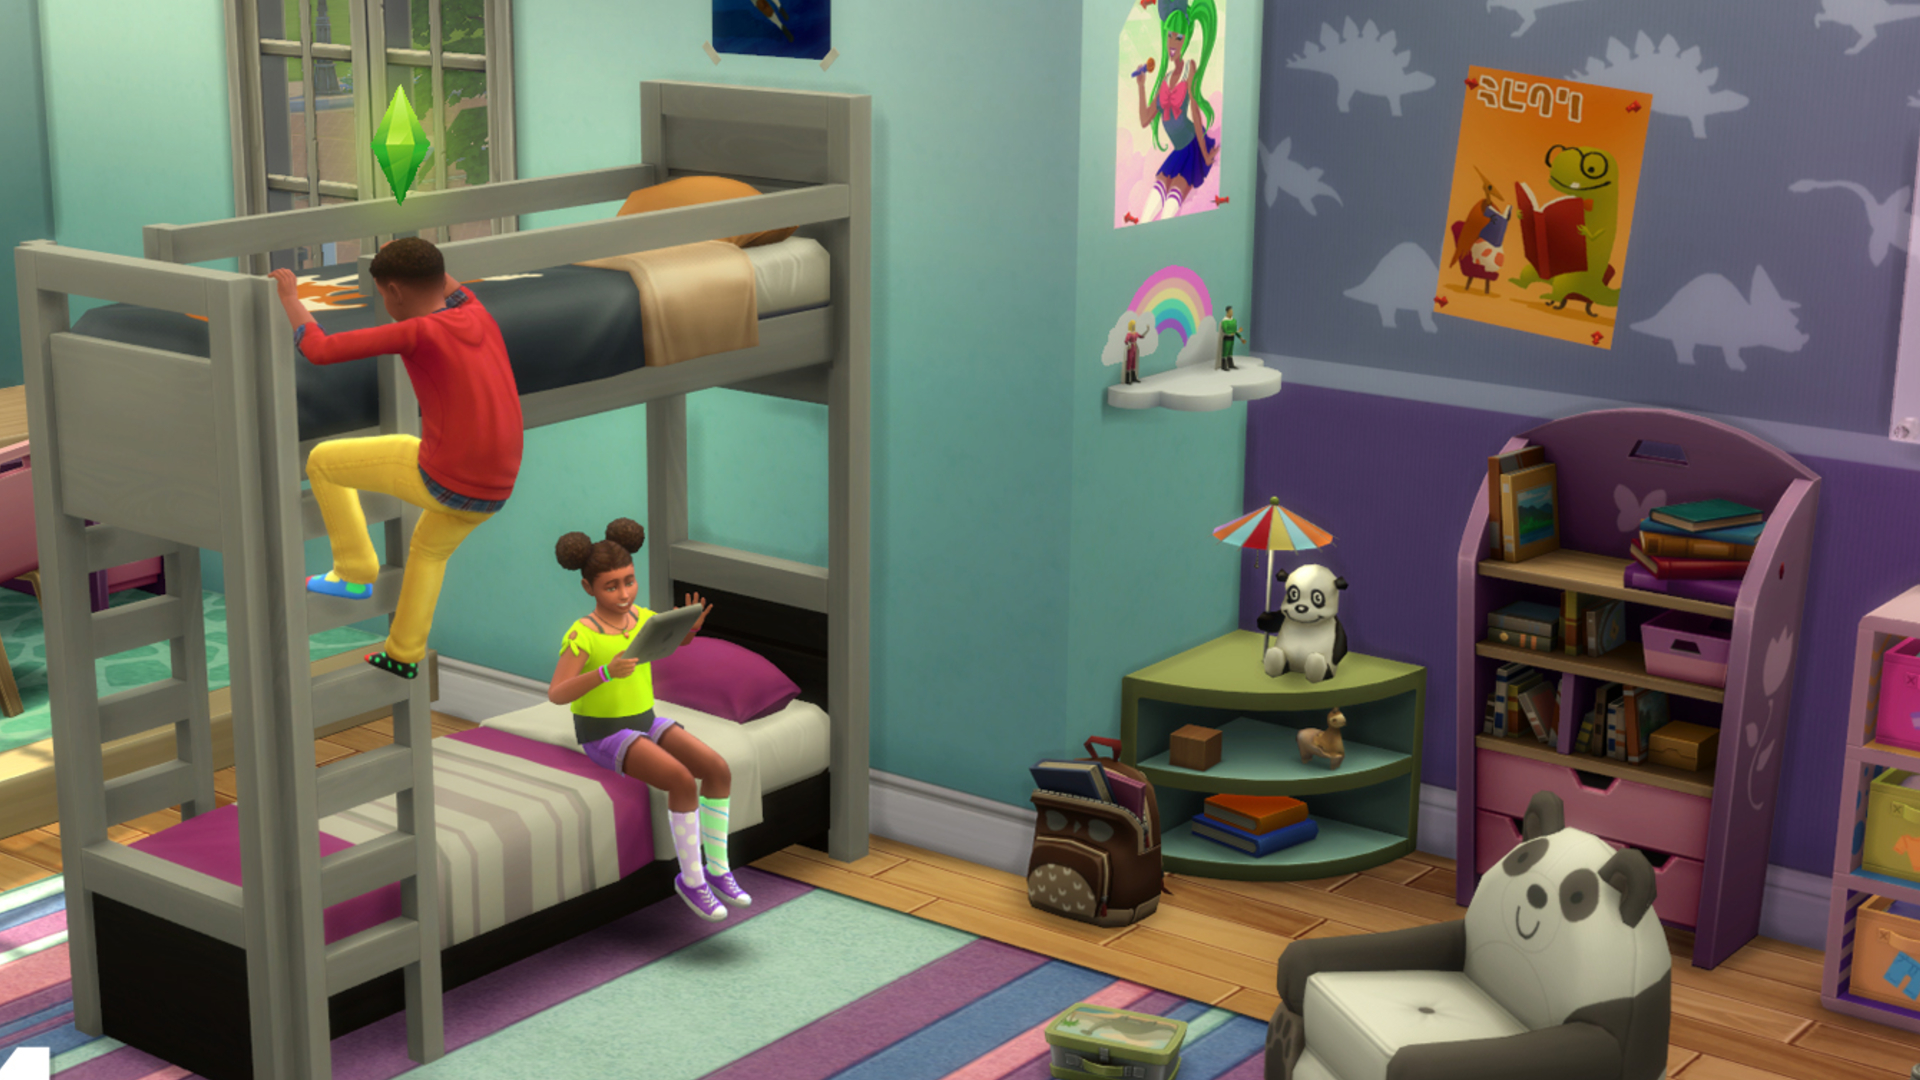  The Sims 4 is getting bunk beds at long last 